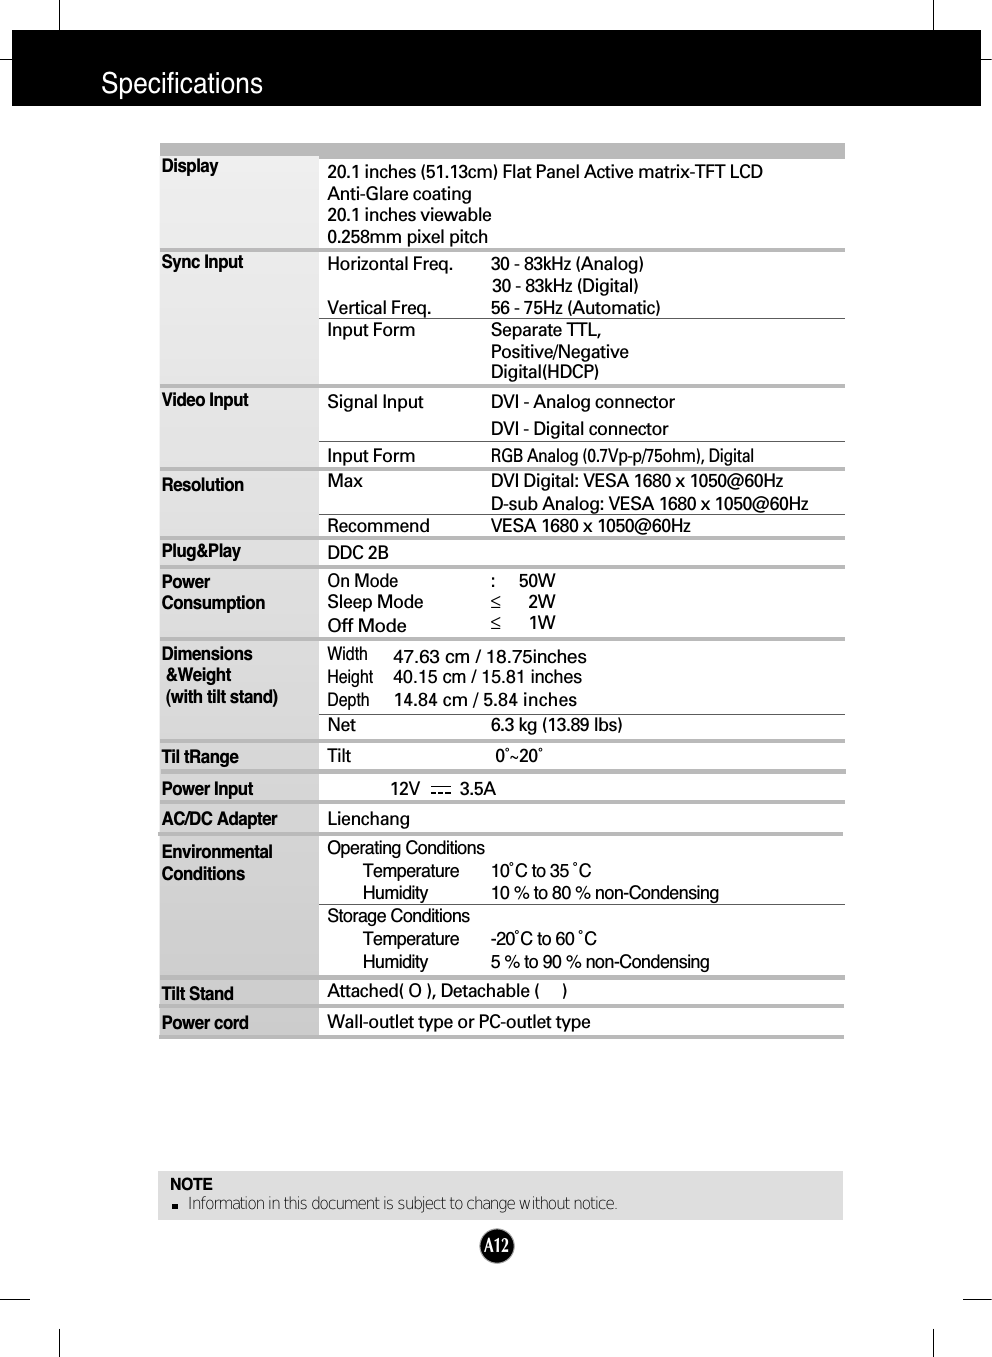 A12Specifications                                                                   NOTEInformation in this document is subject to change without notice.20.1 inches (51.13cm) Flat Panel Active matrix-TFT LCD Anti-Glare coating20.1 inches viewable0.258mm pixel pitchHorizontal Freq. 30 - 83kHz (Analog)30 - 83kHz (Digital)Vertical Freq. 56 - 75Hz (Automatic)Input Form Separate TTL, Positive/NegativeDigital(HDCP)Signal Input DVI - Analog connectorDVI - Digital connectorInput FormRGB Analog (0.7Vp-p/75ohm), DigitalMax DVI Digital: VESA 1680 x 1050@60Hz D-sub Analog: VESA 1680 x 1050@60HzRecommend VESA 1680 x 1050@60HzDDC 2BOn Mode :50WSleep Mode ≤2WOff Mode≤1WWidth 47.63 cm / 18.75inchesHeight 40.15 cm / 15.81 inchesDepth 14.84 cm / 5.84 inches Net 6.3 kg (13.89 lbs)Tilt0˚~20˚12V         3.5ALienchangOperating ConditionsTemperature 10˚C to 35 ˚CHumidity 10 % to 80 % non-CondensingStorage ConditionsTemperature -20˚C to 60 ˚CHumidity 5 % to 90 % non-CondensingAttached( O ), Detachable (     )Wall-outlet type or PC-outlet typeDisplaySync InputVideo InputResolutionPlug&amp;PlayPowerConsumptionDimensions&amp;Weight(with tilt stand)Til tRangePower InputAC/DC AdapterEnvironmentalConditionsTilt StandPower cord